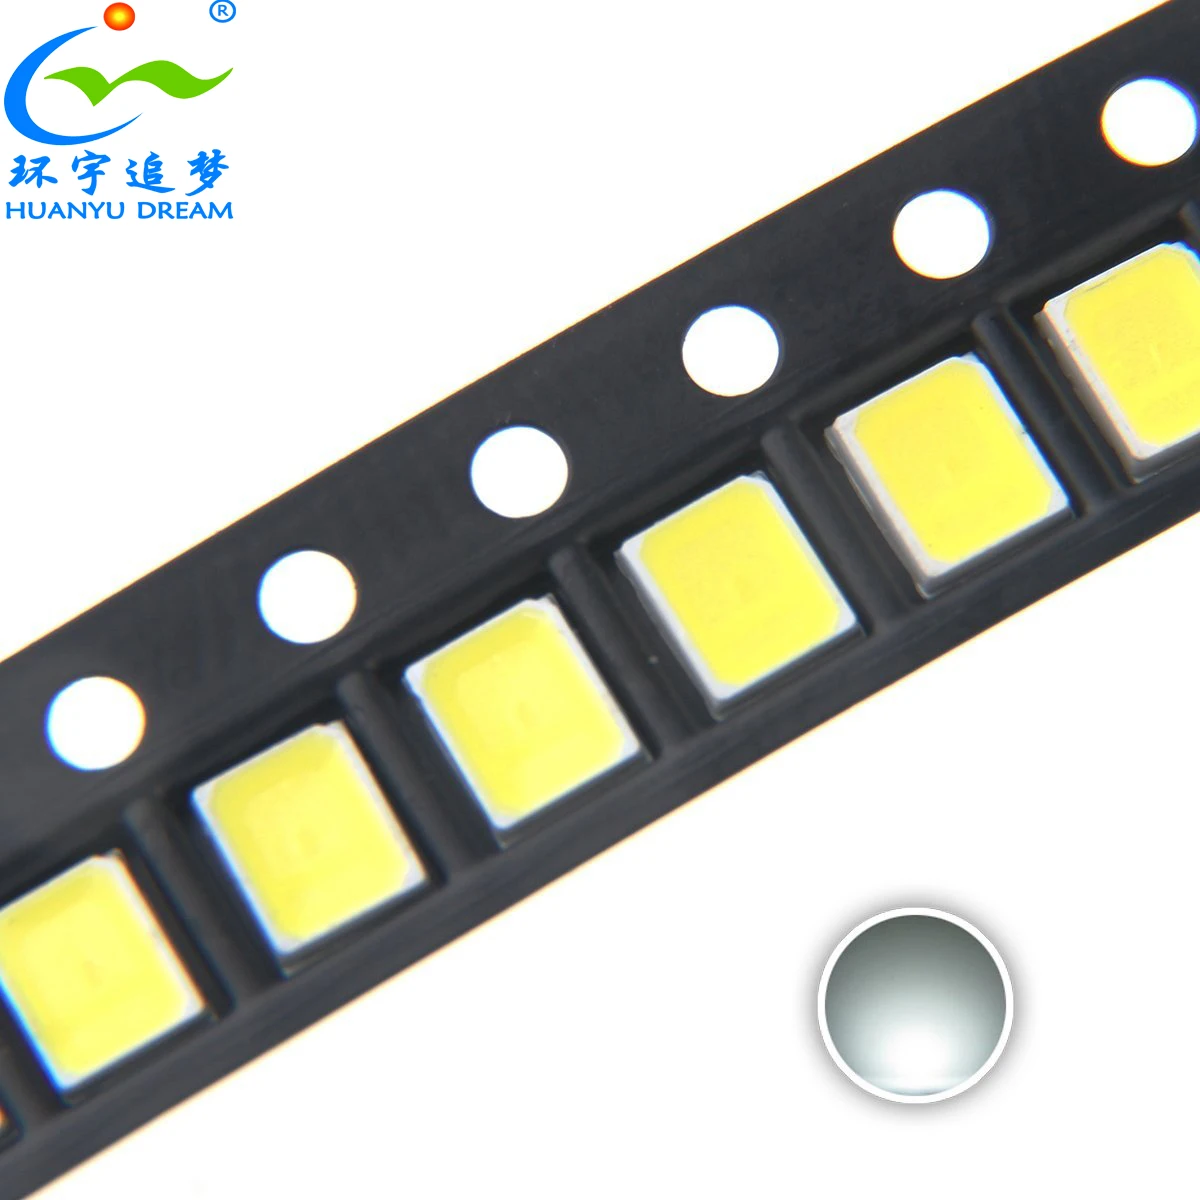 SOP 2 3250-3650k 120 ° blanco cálido 20ma rf-k35hk30ds-ec-y le LED SMD 80 6 ÷ 10lm 3528